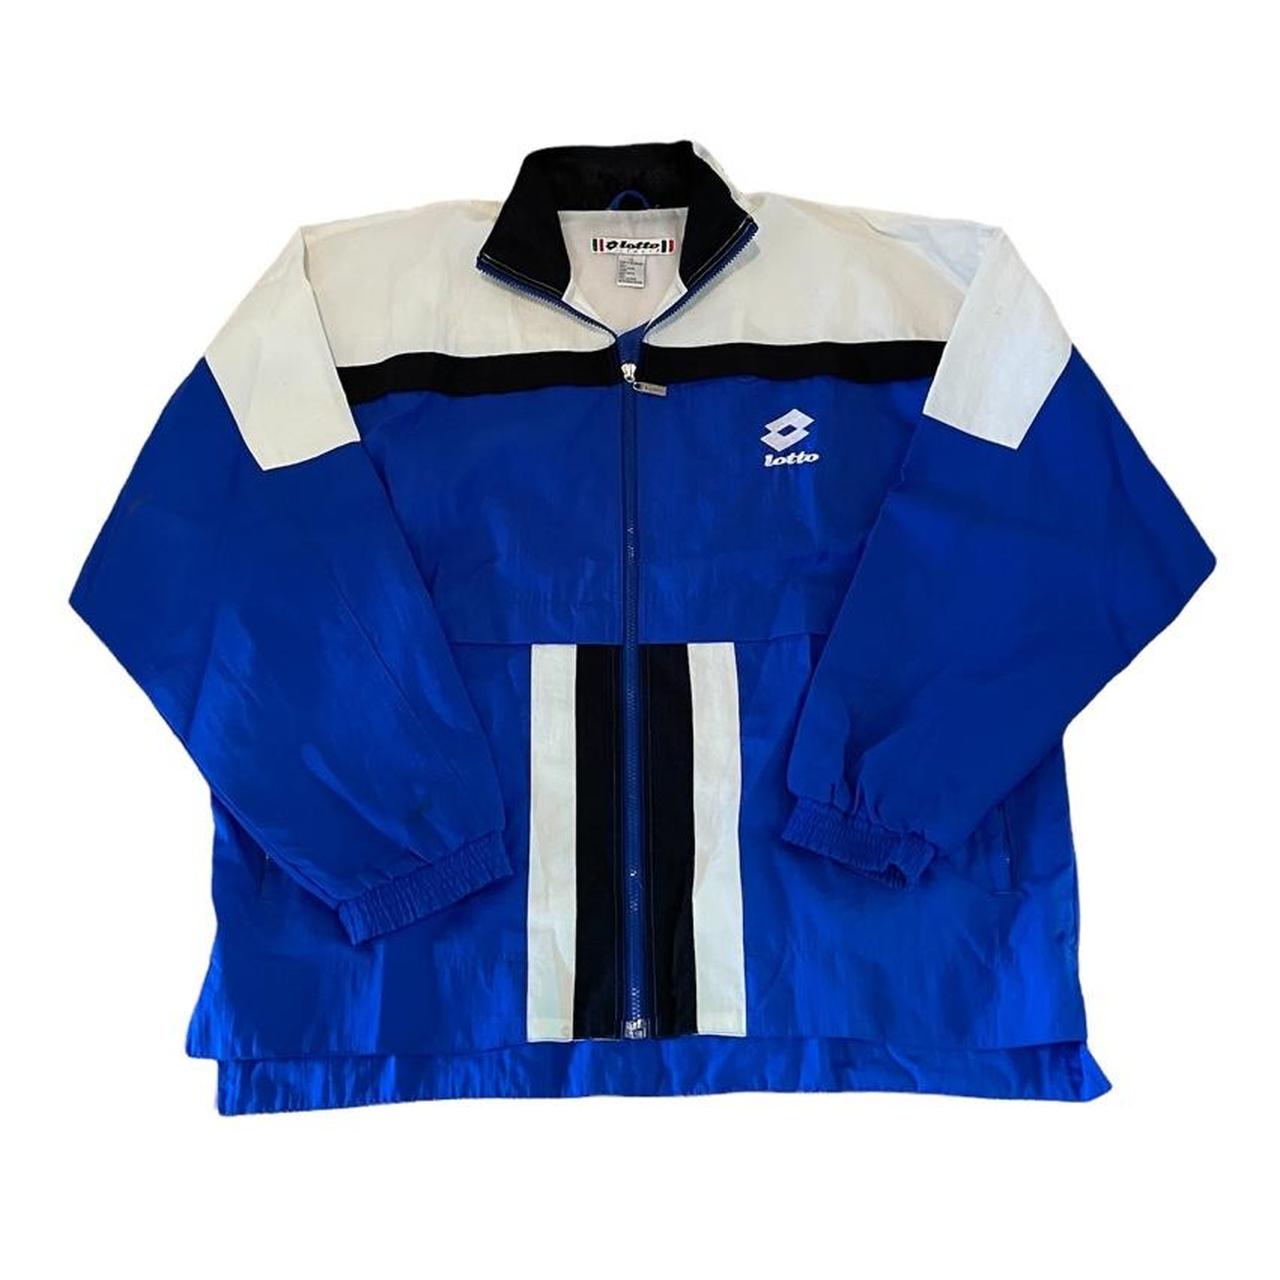 Lotto Men's Blue and White Jacket